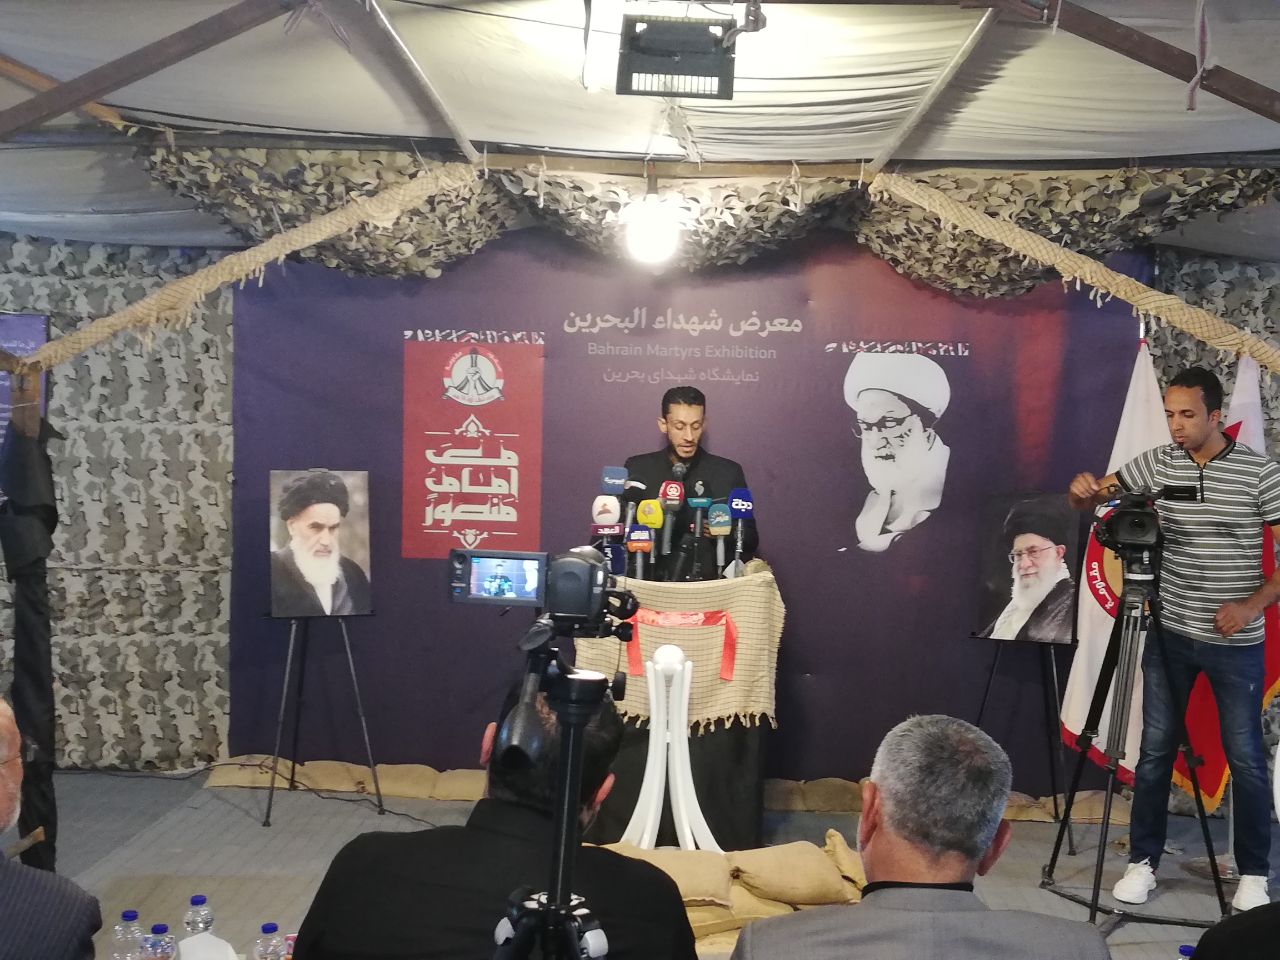 Bahrain Martyrs Exhibition Administration holds a consolation council on 40th day